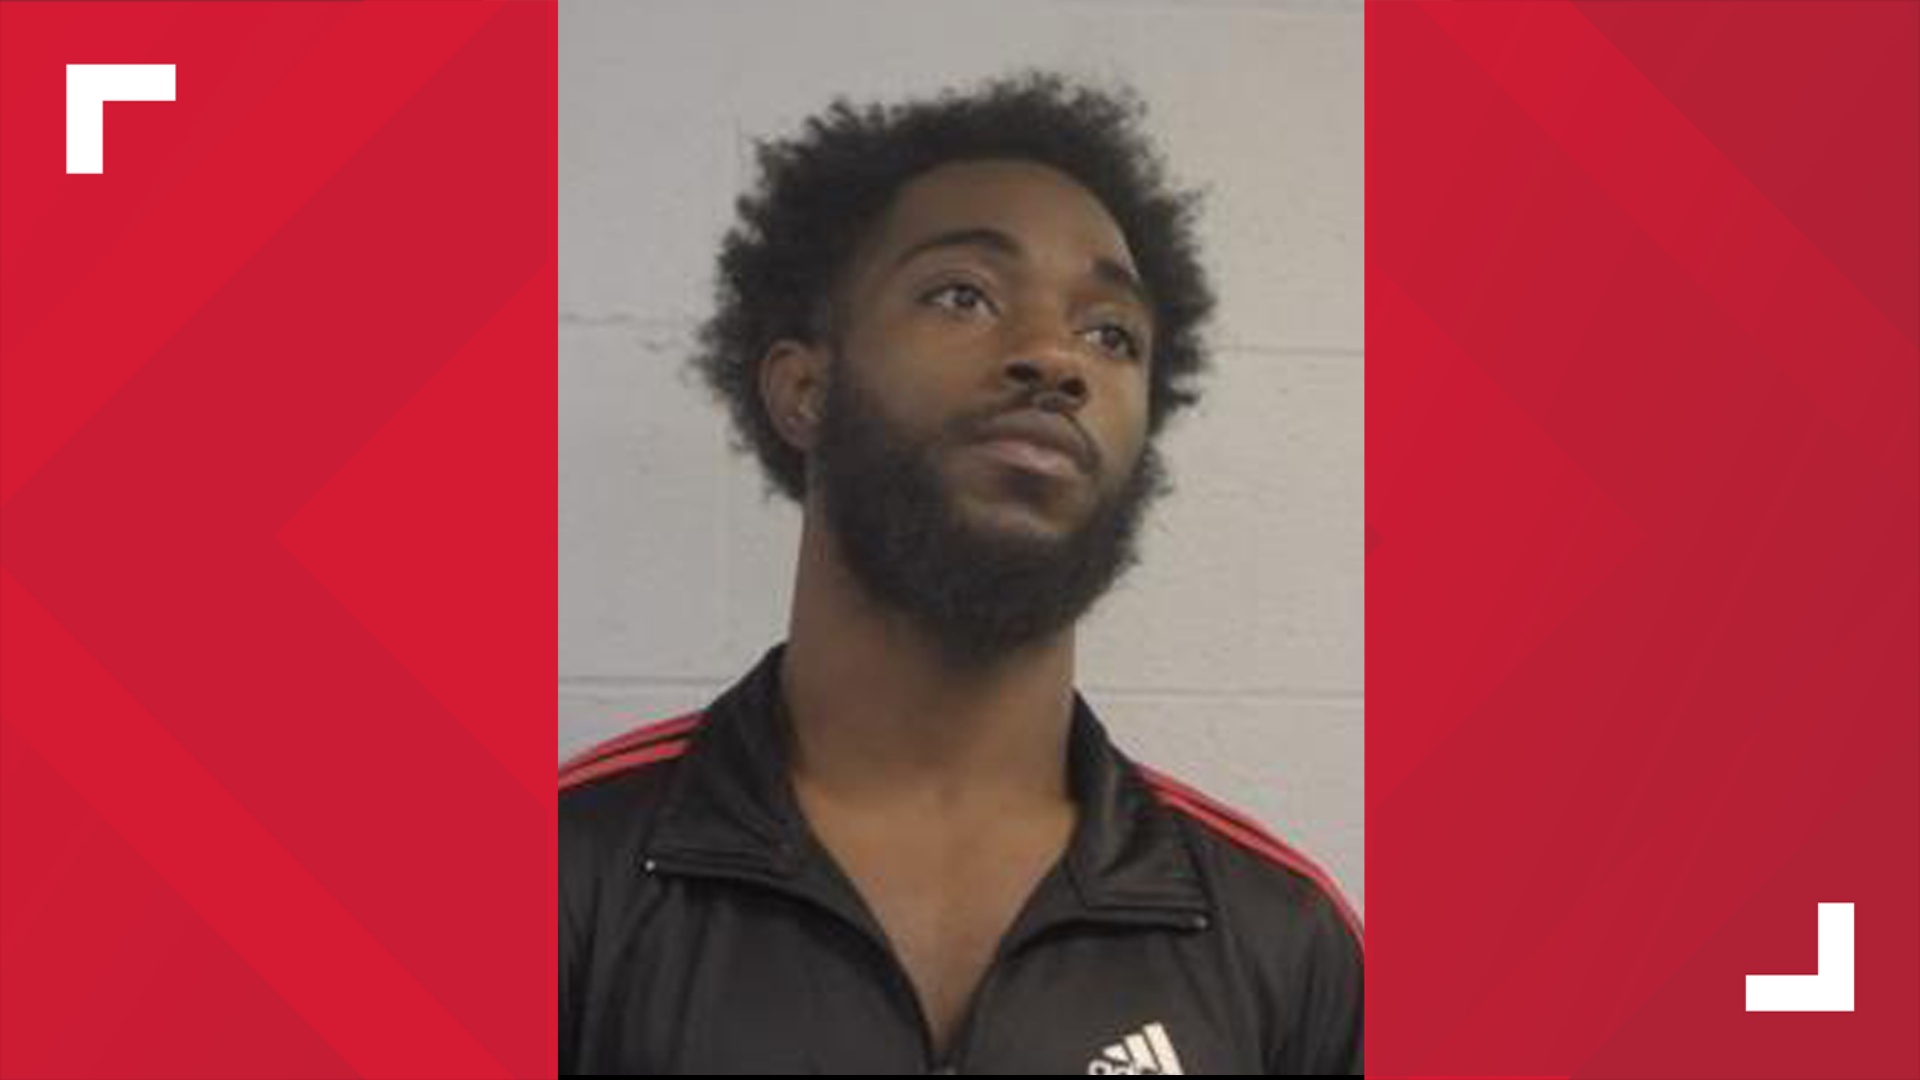 Jameko Lee Hayden is charged with murder, receiving stolen property and possession of a handgun by a convicted felon in the death of Christian Gwynn.